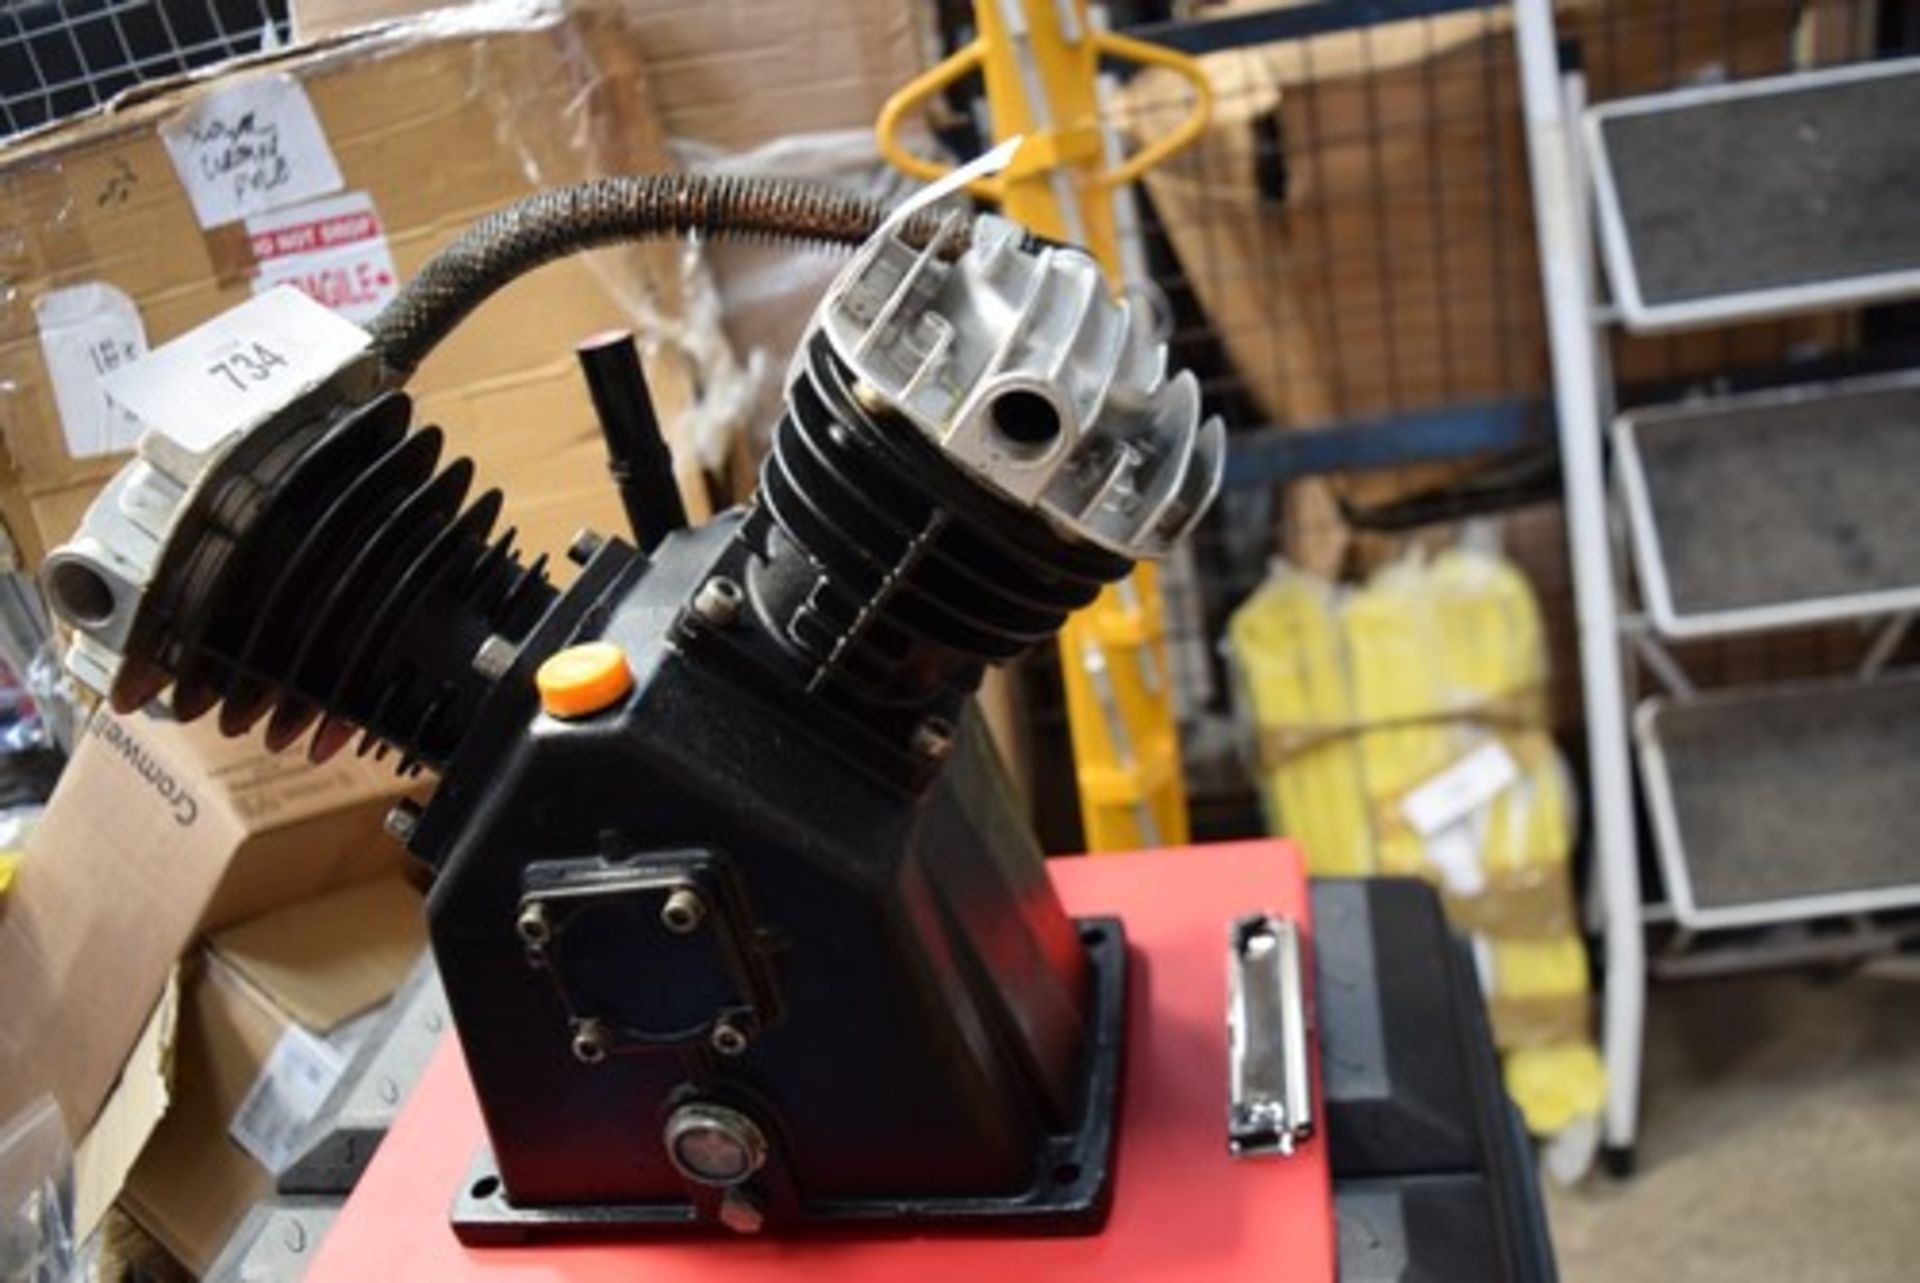 1 x Vee shape 2 cylinder air compressor, maybe reconditioned, no manufacturer's mark - no motor, - Image 2 of 4